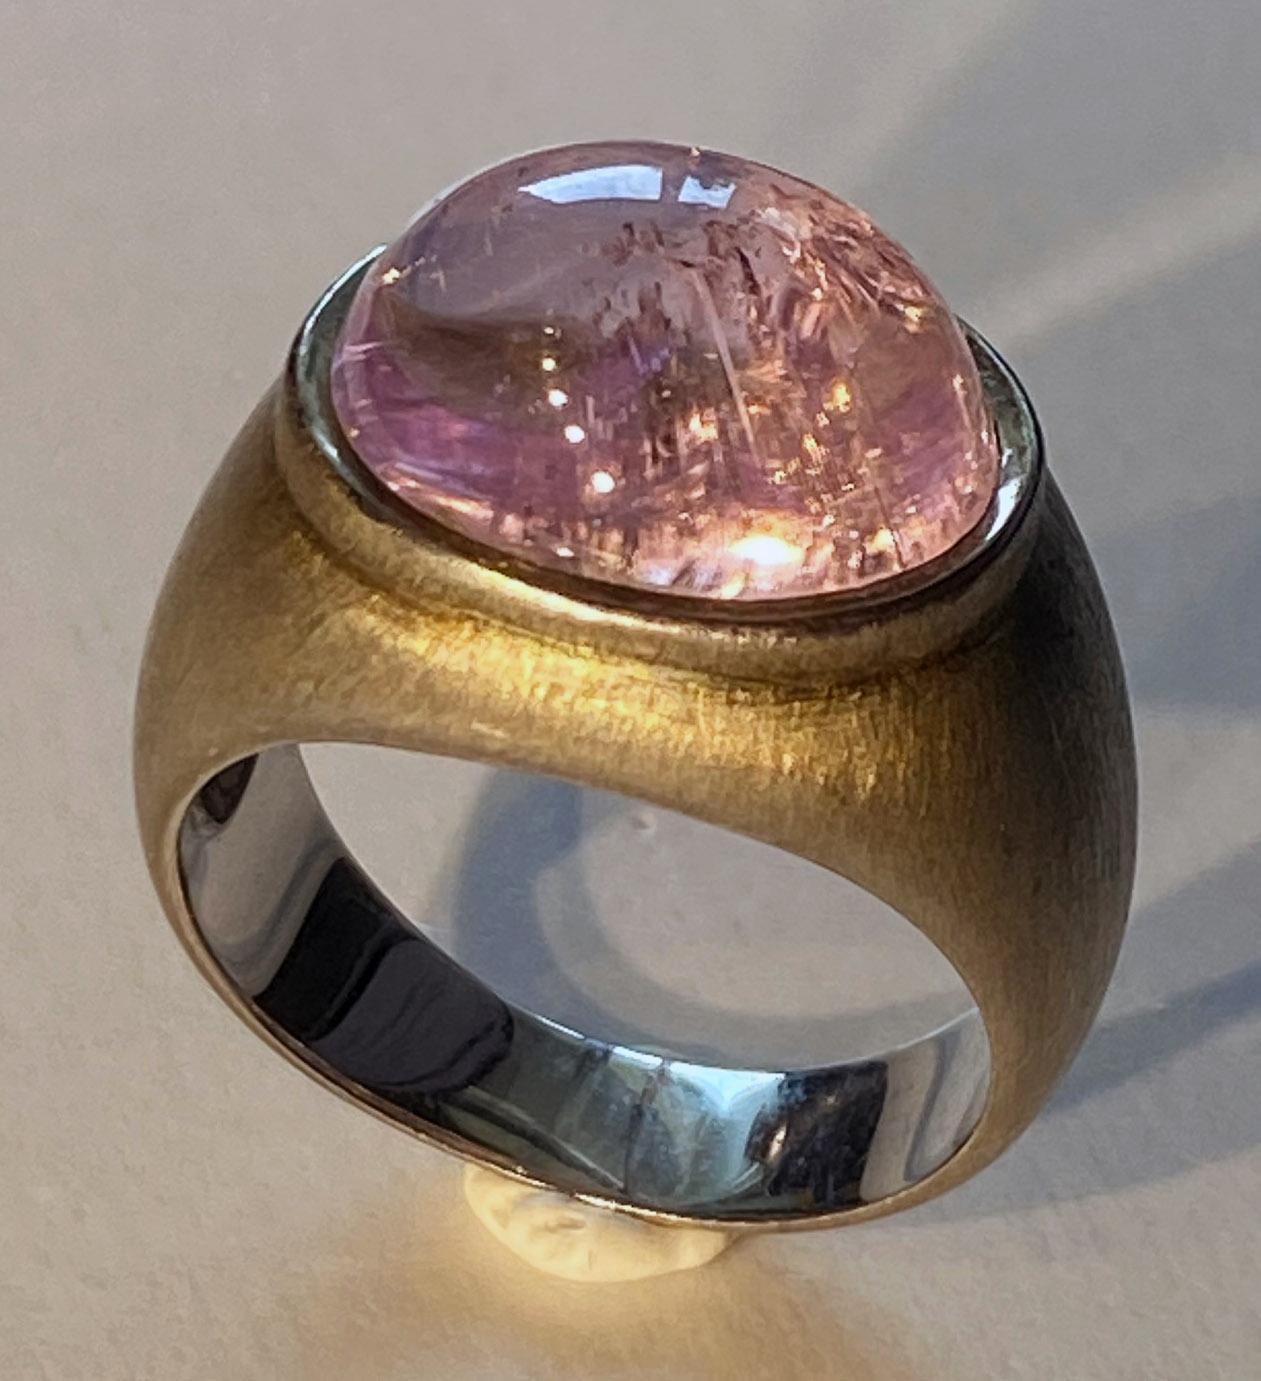 A Brushed Silver Dome Ring set with a 7.5 Carat Pink Kunzite Cabochon. This Brushed Silver ring is sized 7.5 USA and has a lovely aged patina where the Silver has slightly oxidized. The Kunzite Cabochon shows a lovely pink color with natural